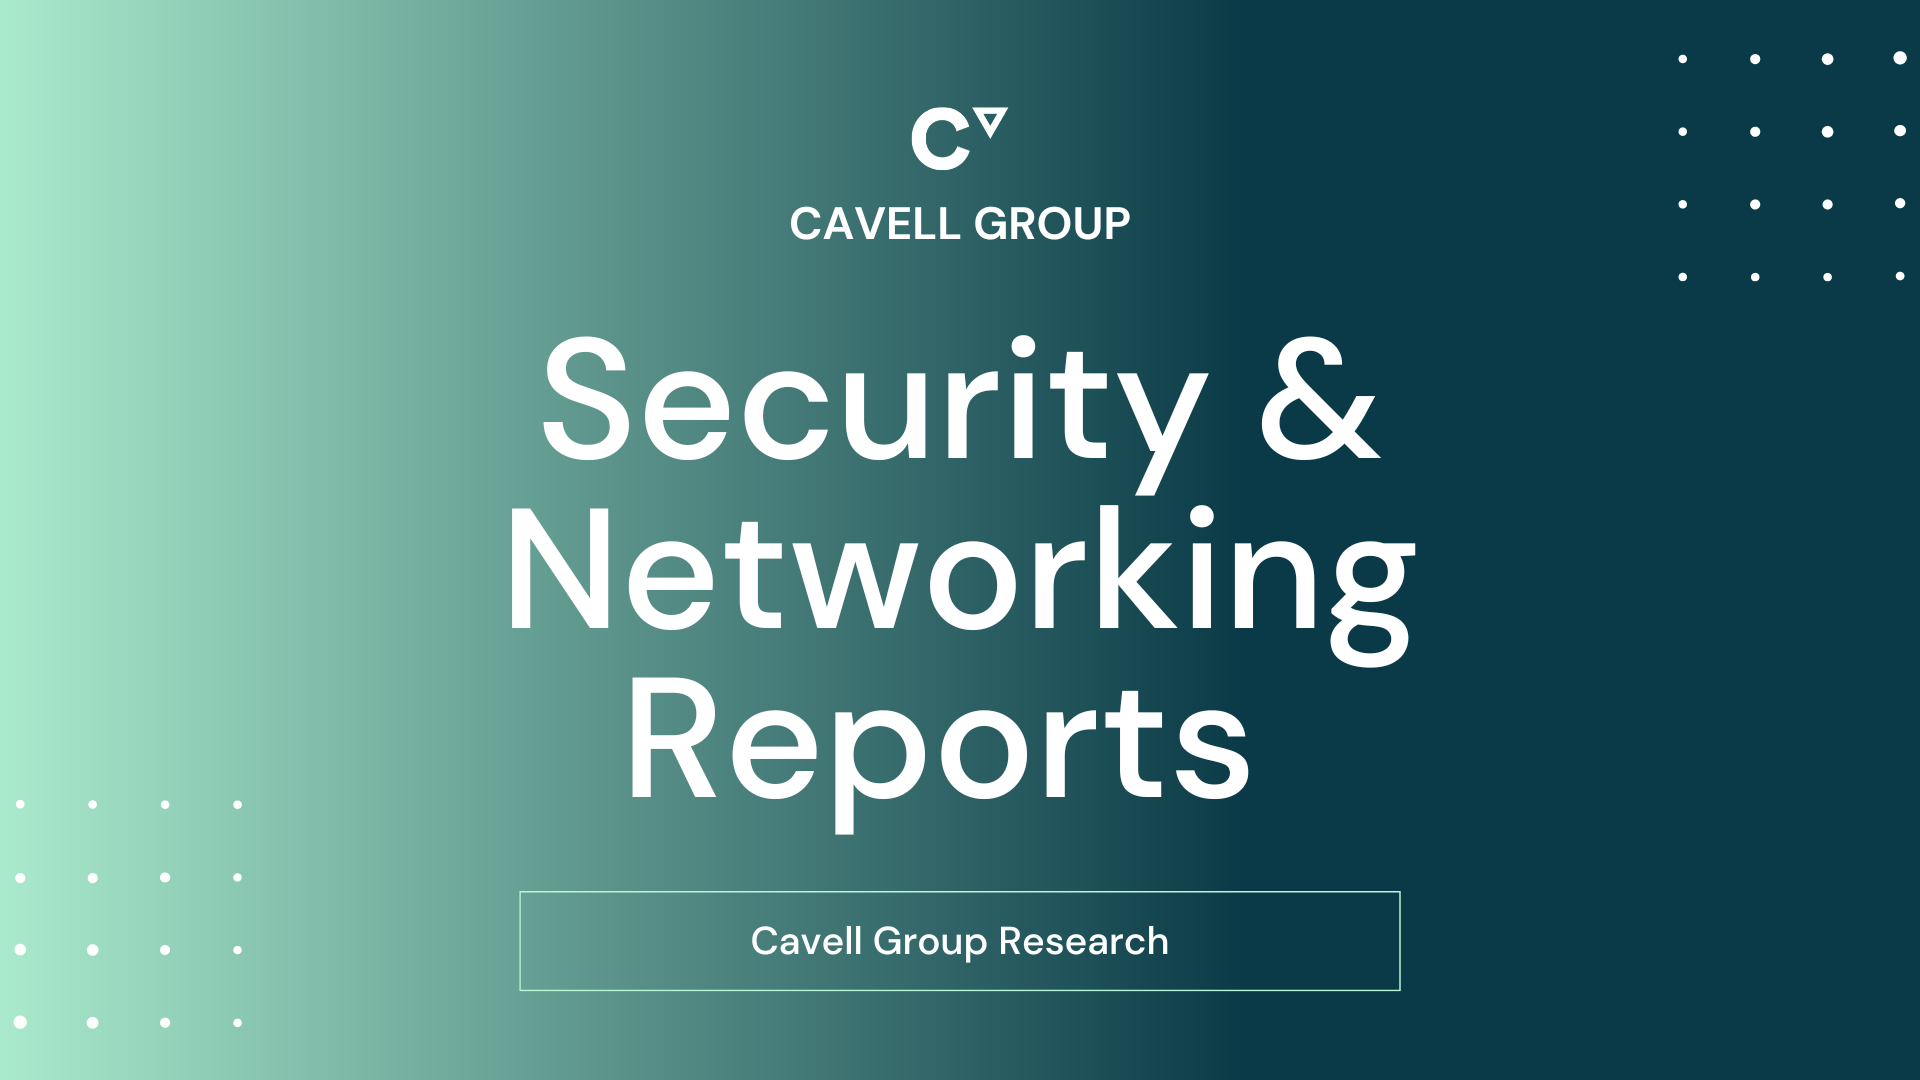 Cavell Group Research: Security & Networking Reports